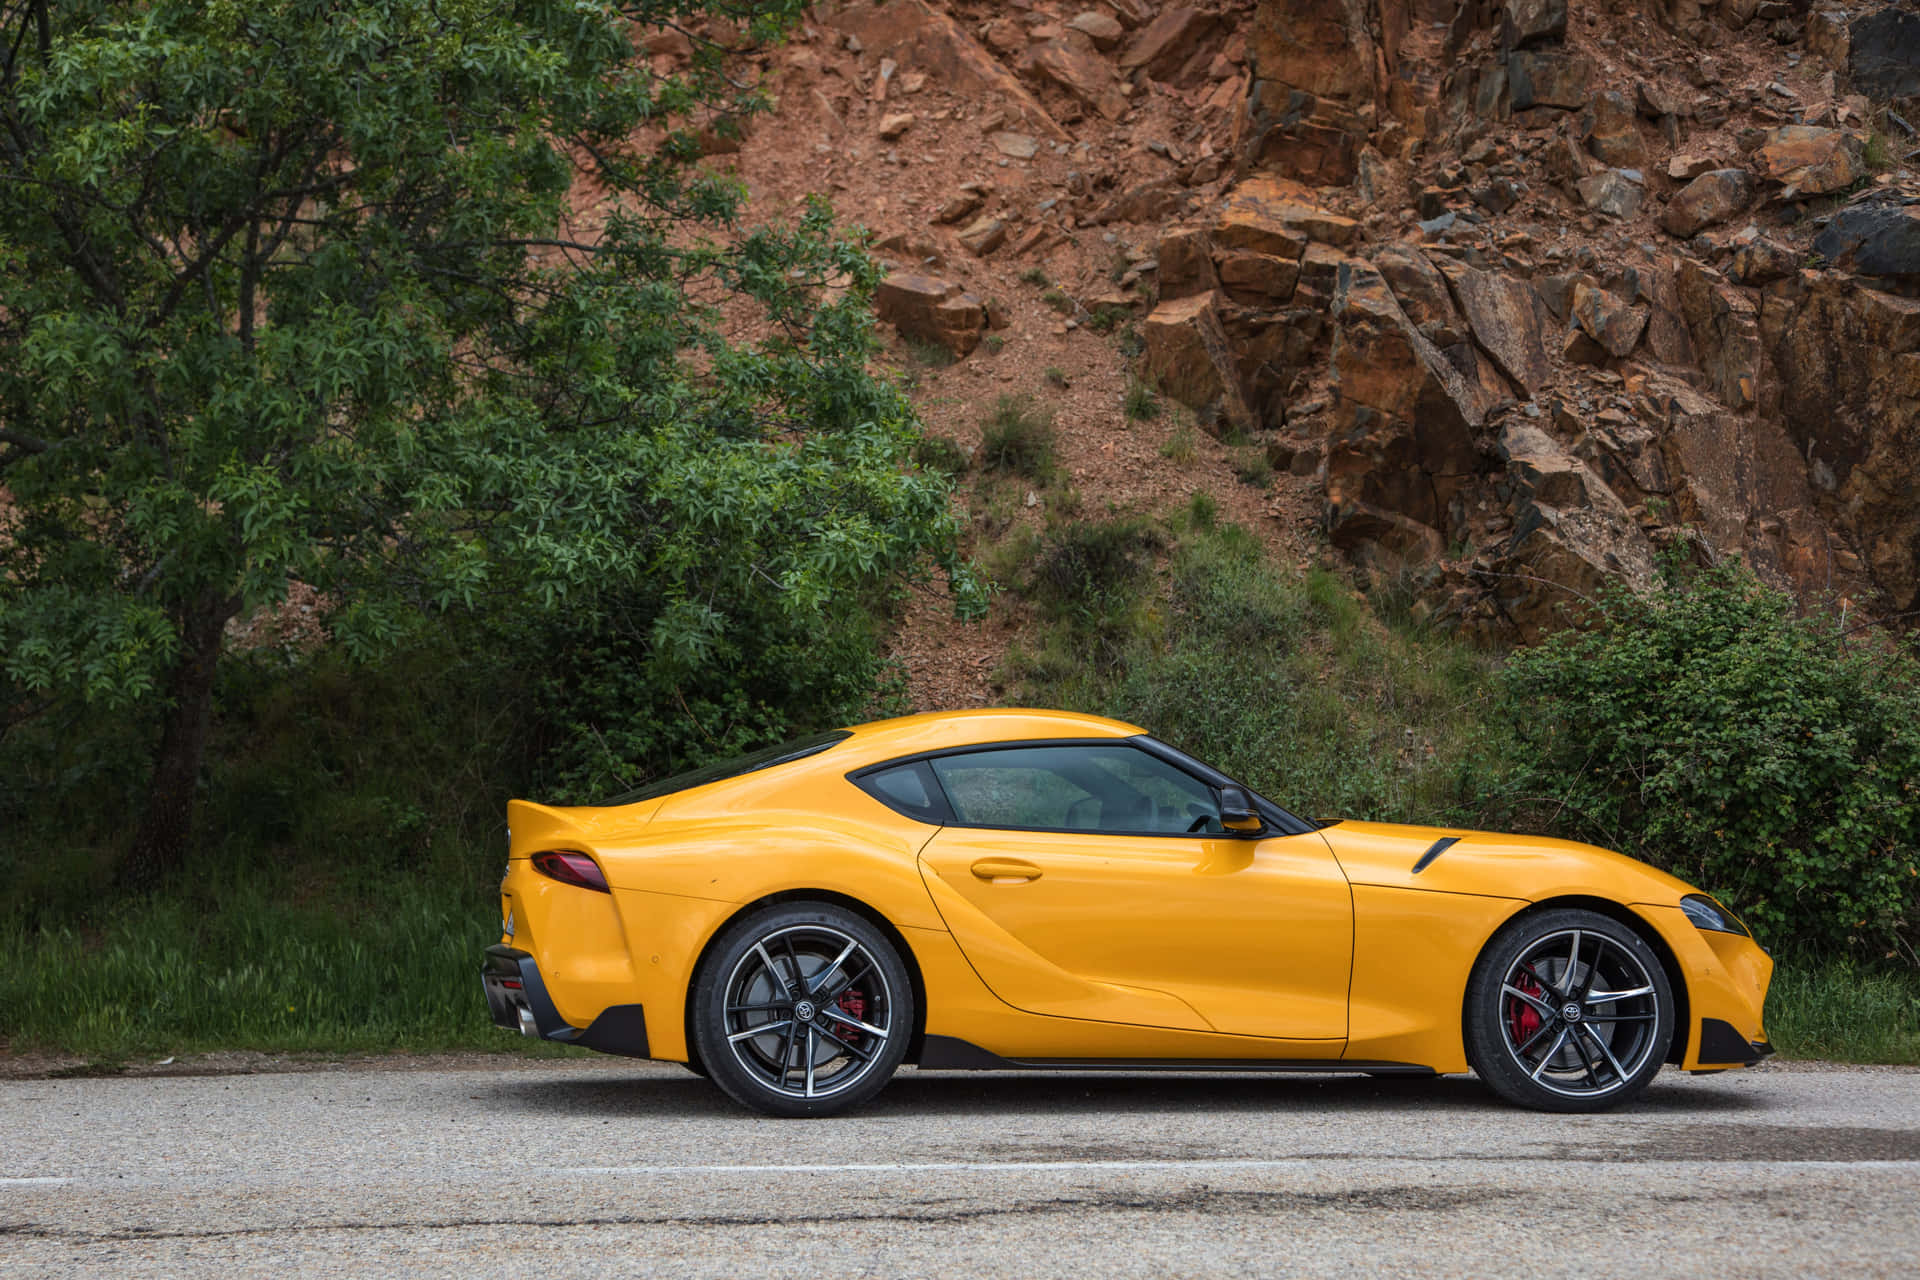 A stunning Toyota Supra sports car on display in a picturesque landscape.